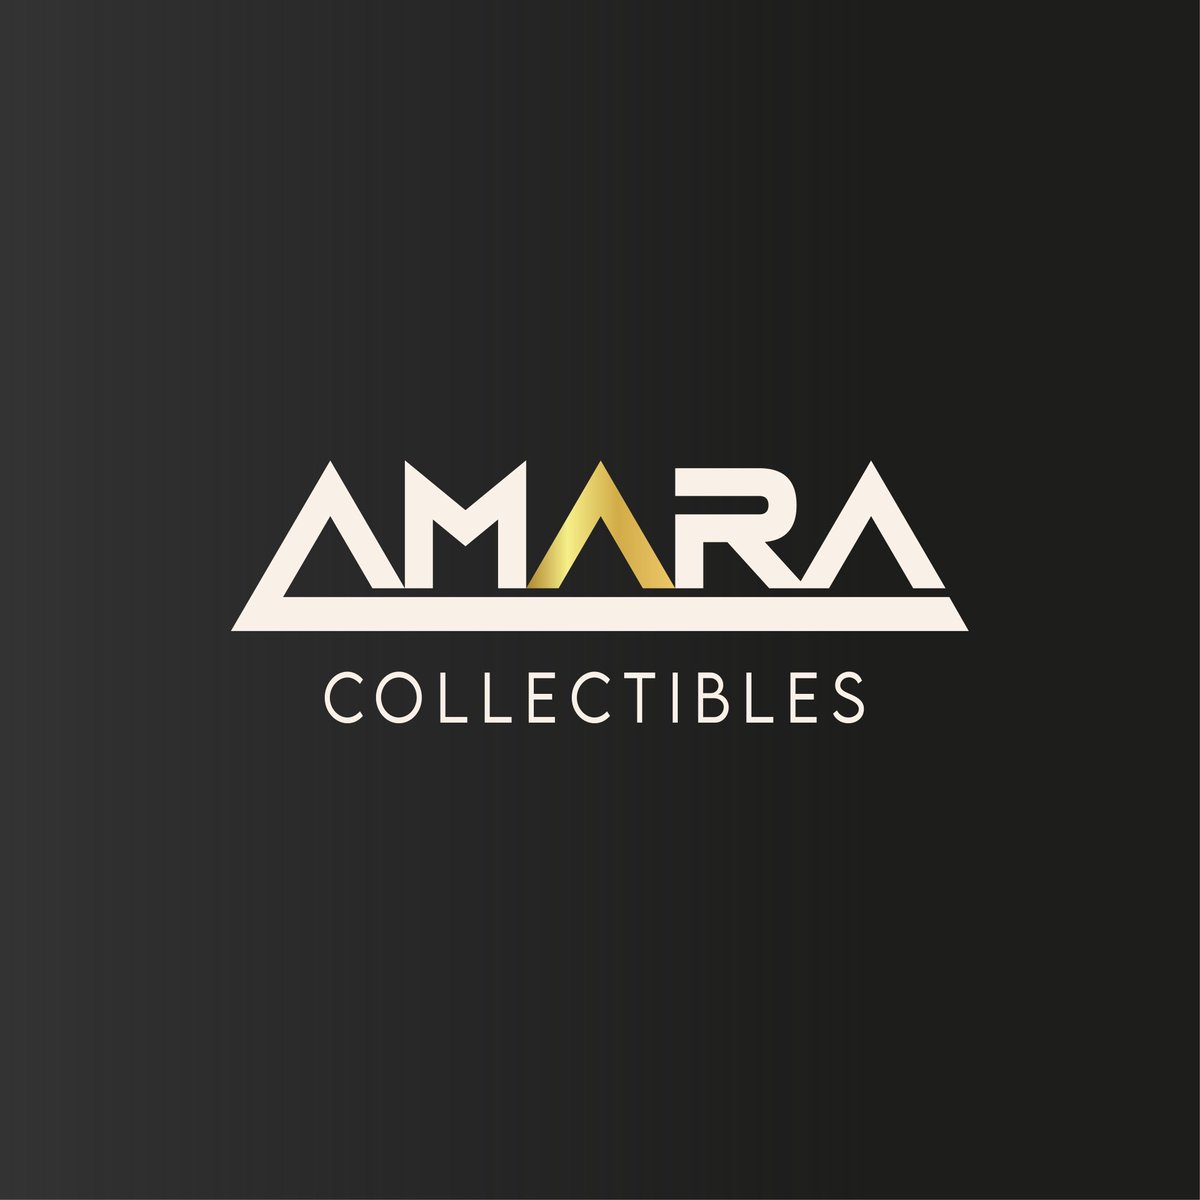 We are proud to announce the establishment of Amara Collectibles! An art, collectibles and fashion retail entity based in South Africa, founded by our director @leo_lobelo 🇿🇦 📧 info@amaracollectibles.com